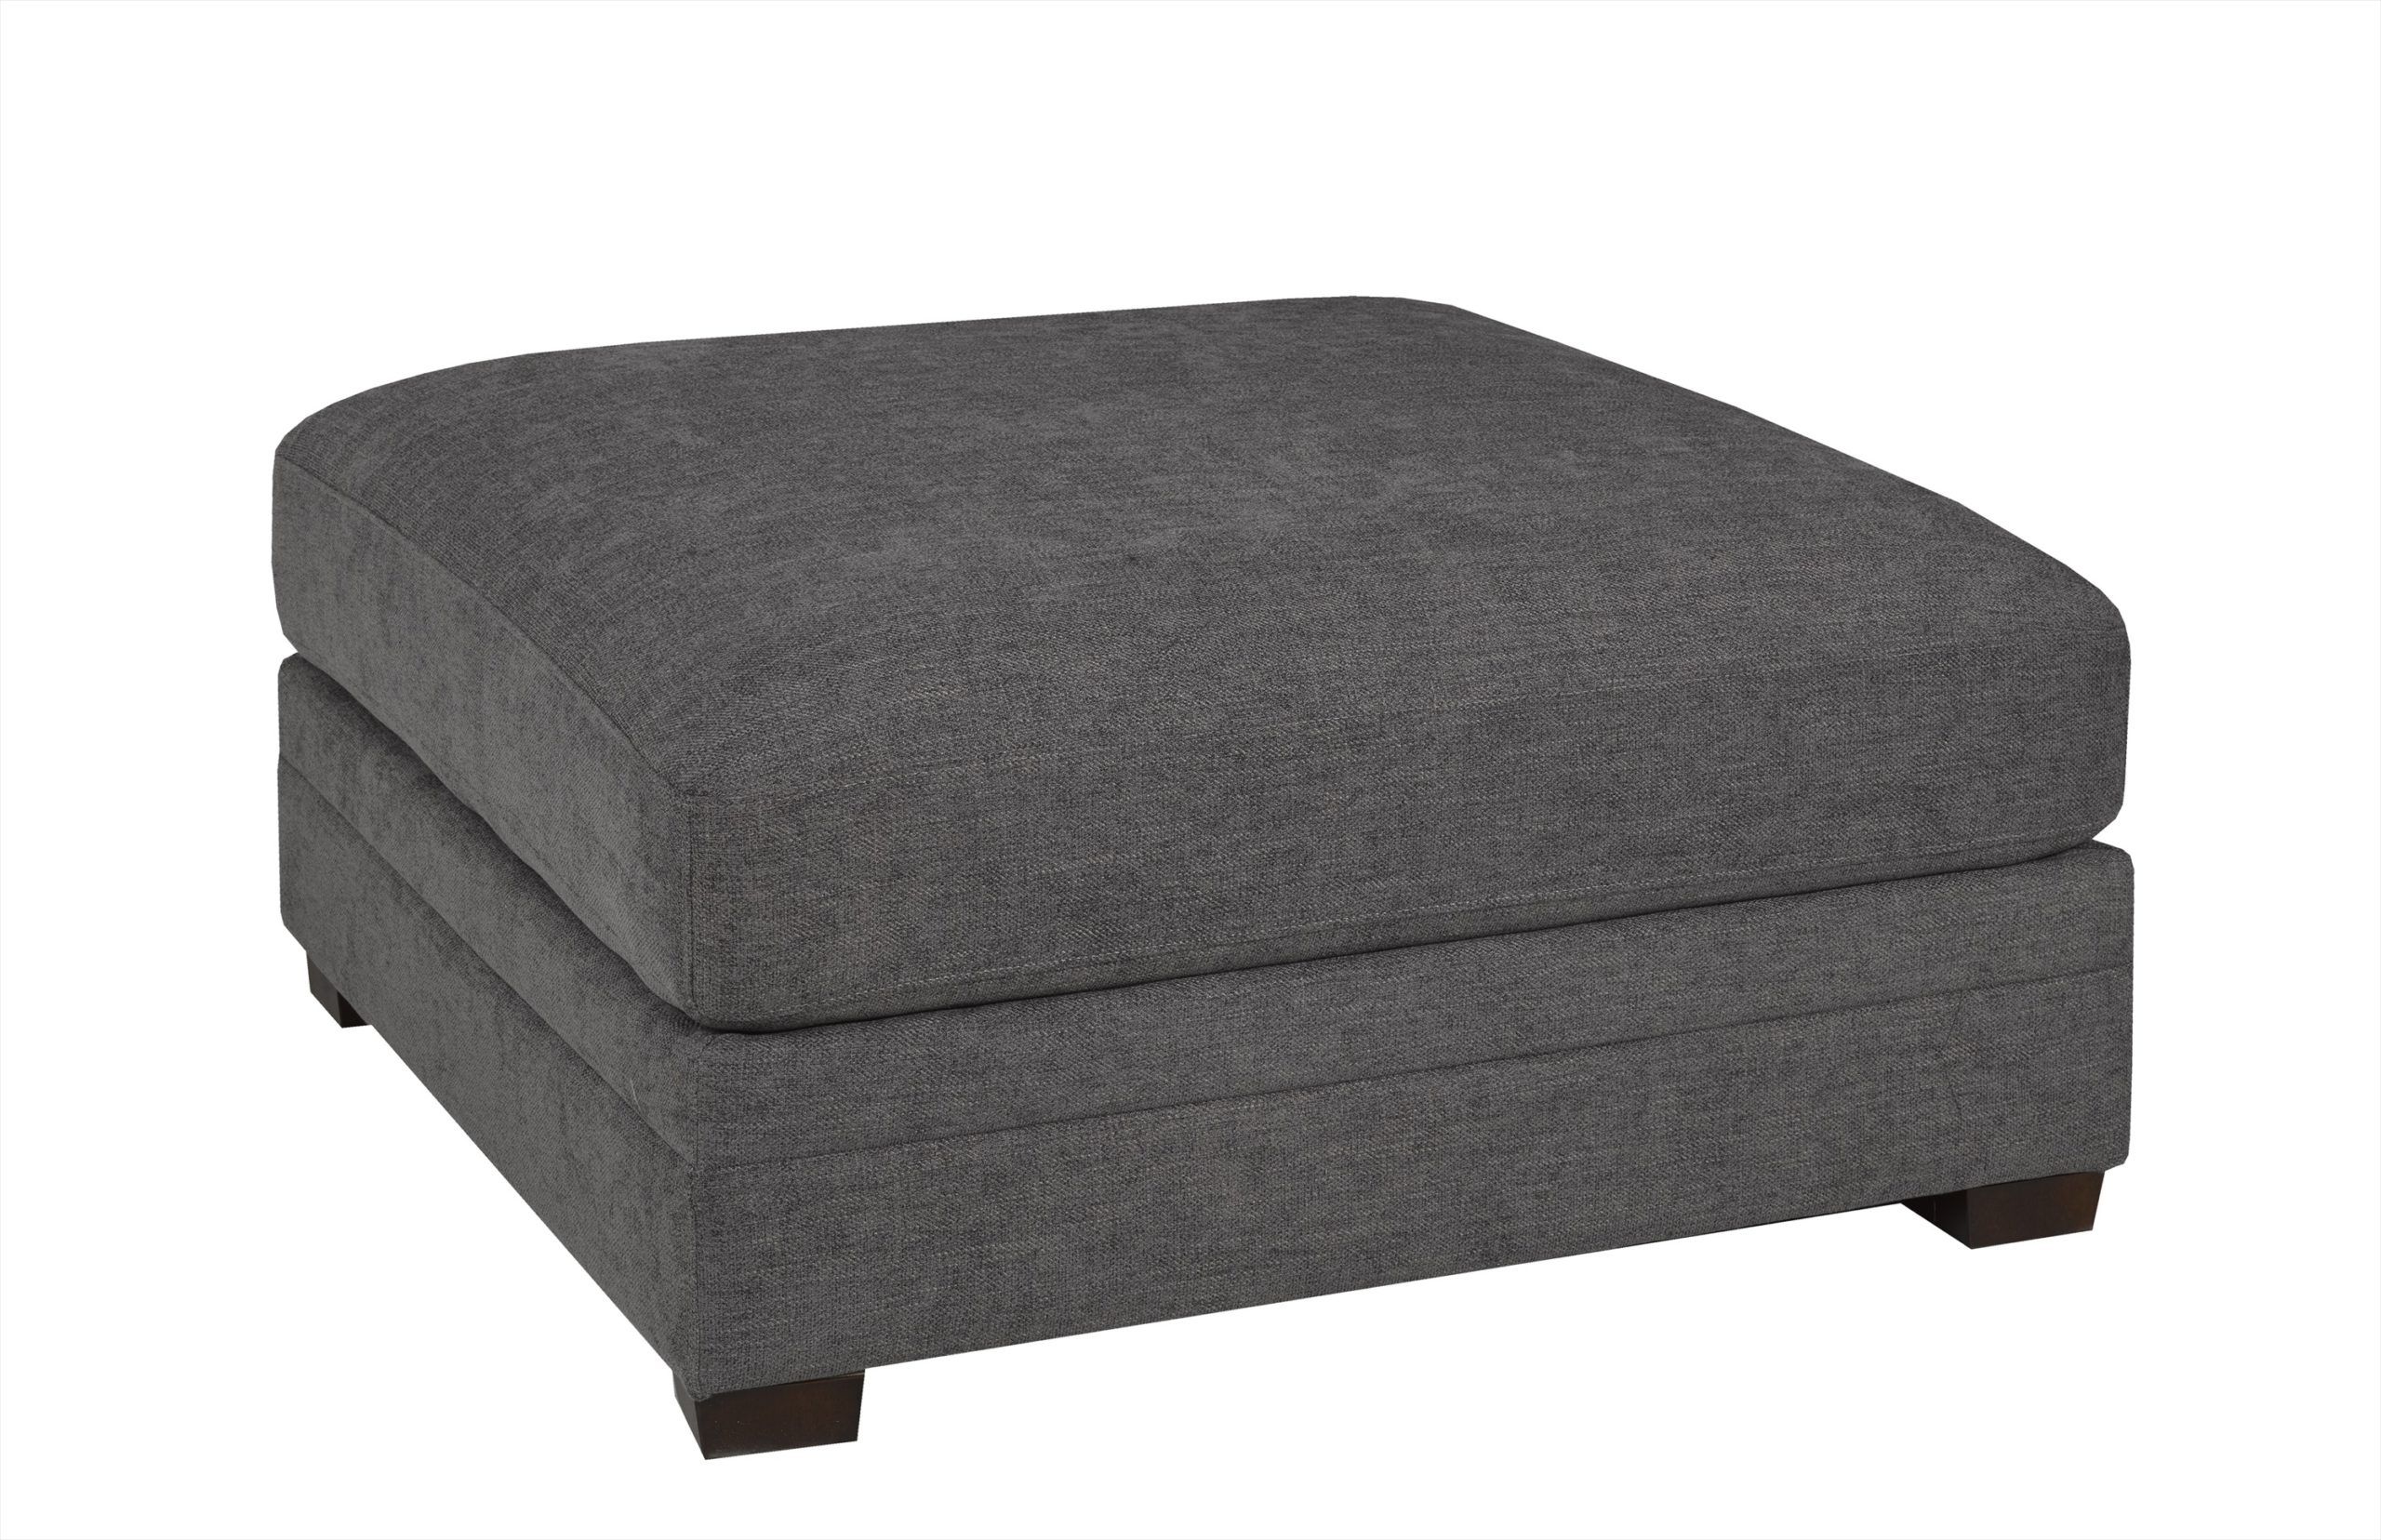 Most Current Charcoal And Light Gray Cotton Pouf Ottomans Inside Contemporary Charcoal Grey Ottoman (View 1 of 10)